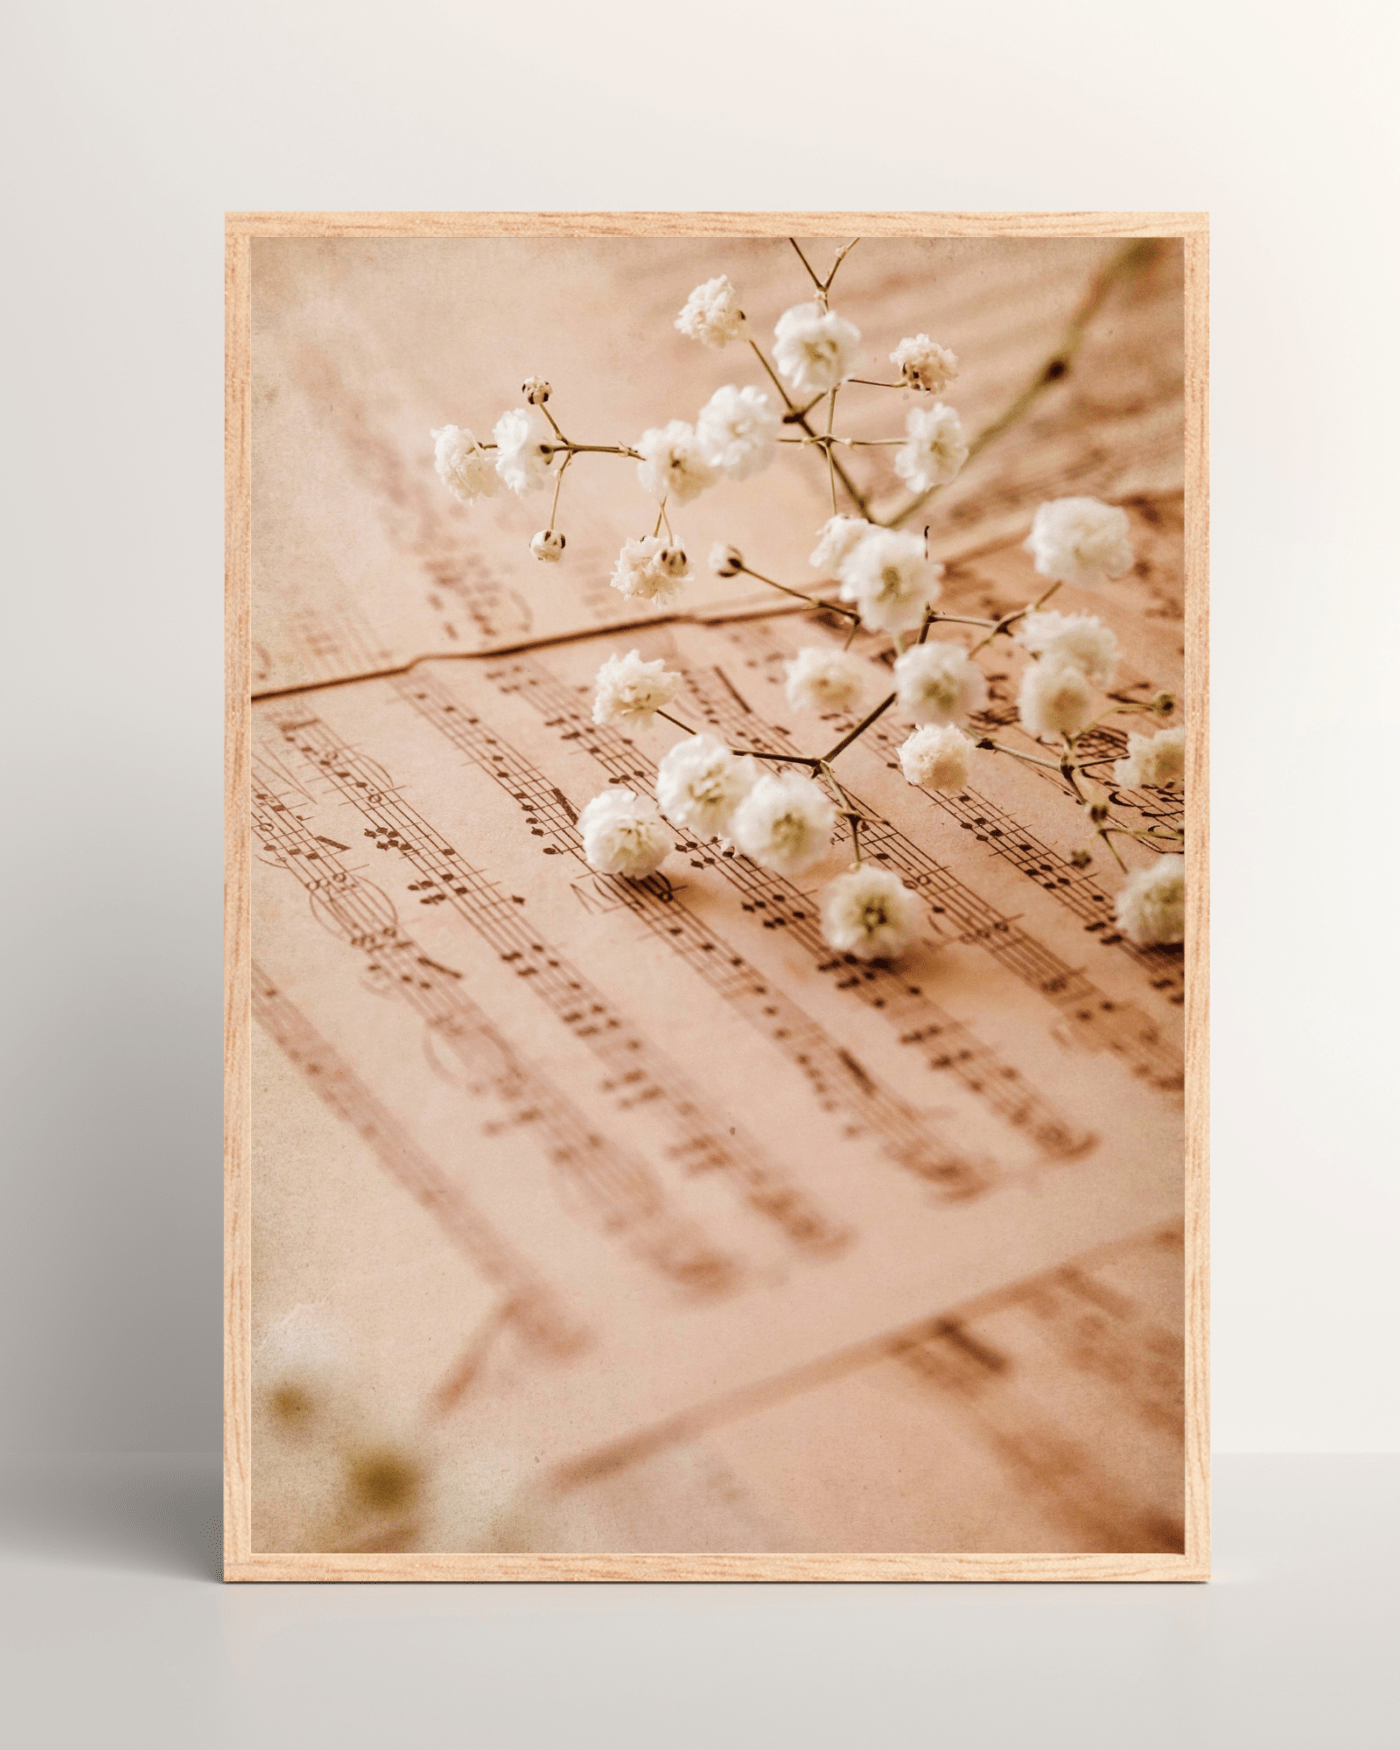 Small White Flowers and Music Sheets Mockup3